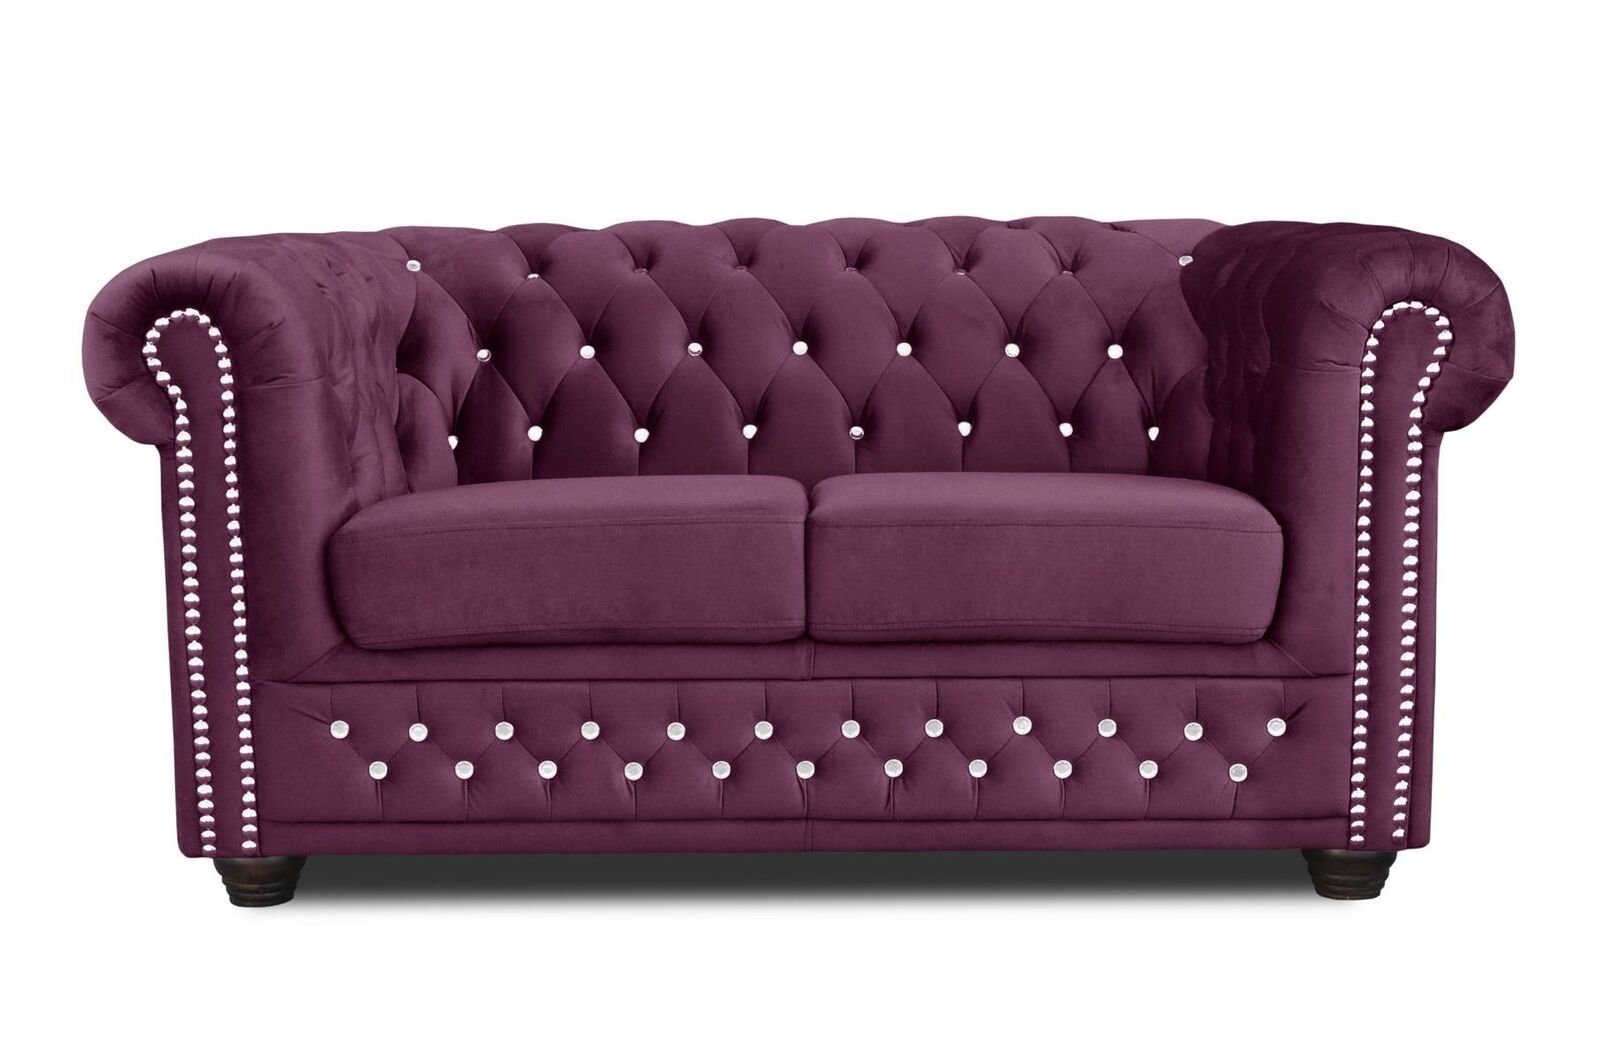 2Sitzer Lila Stoff in Couch Textil Chesterfield Polster JVmoebel Made Europe Sofa Zweisitzer Sofa,